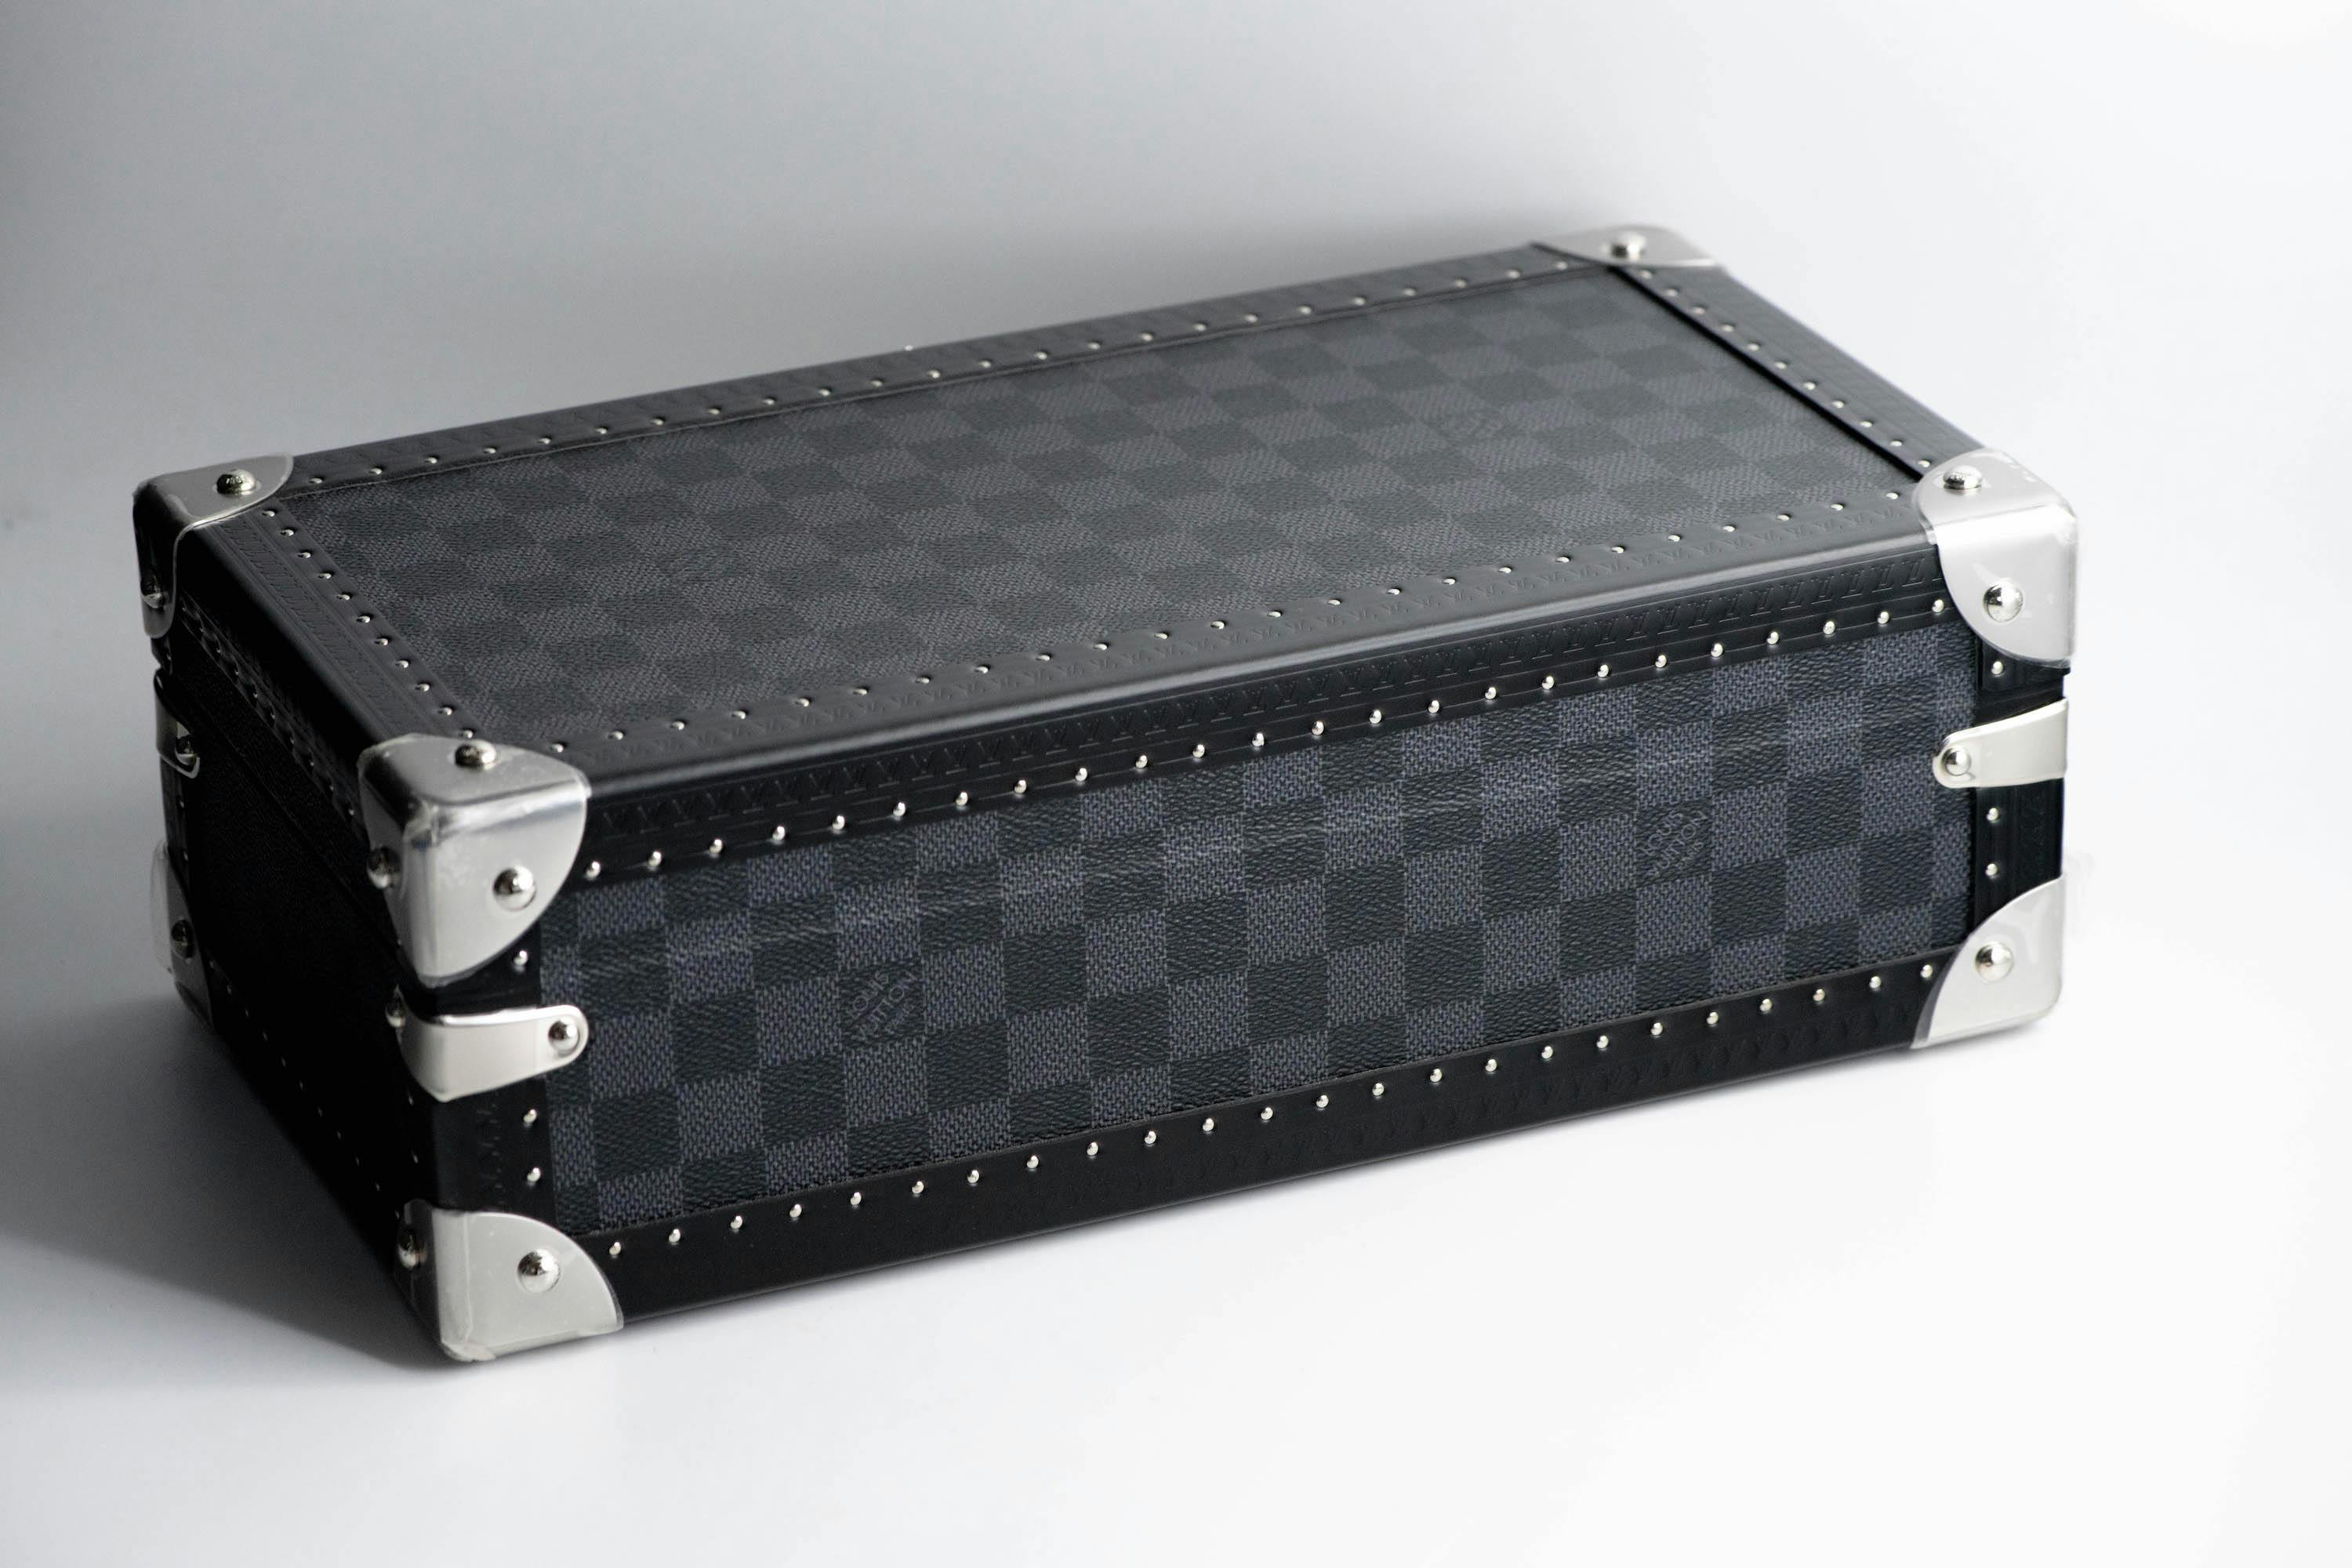 One of the very best 'unused, used' Louis Vuitton trunks we have